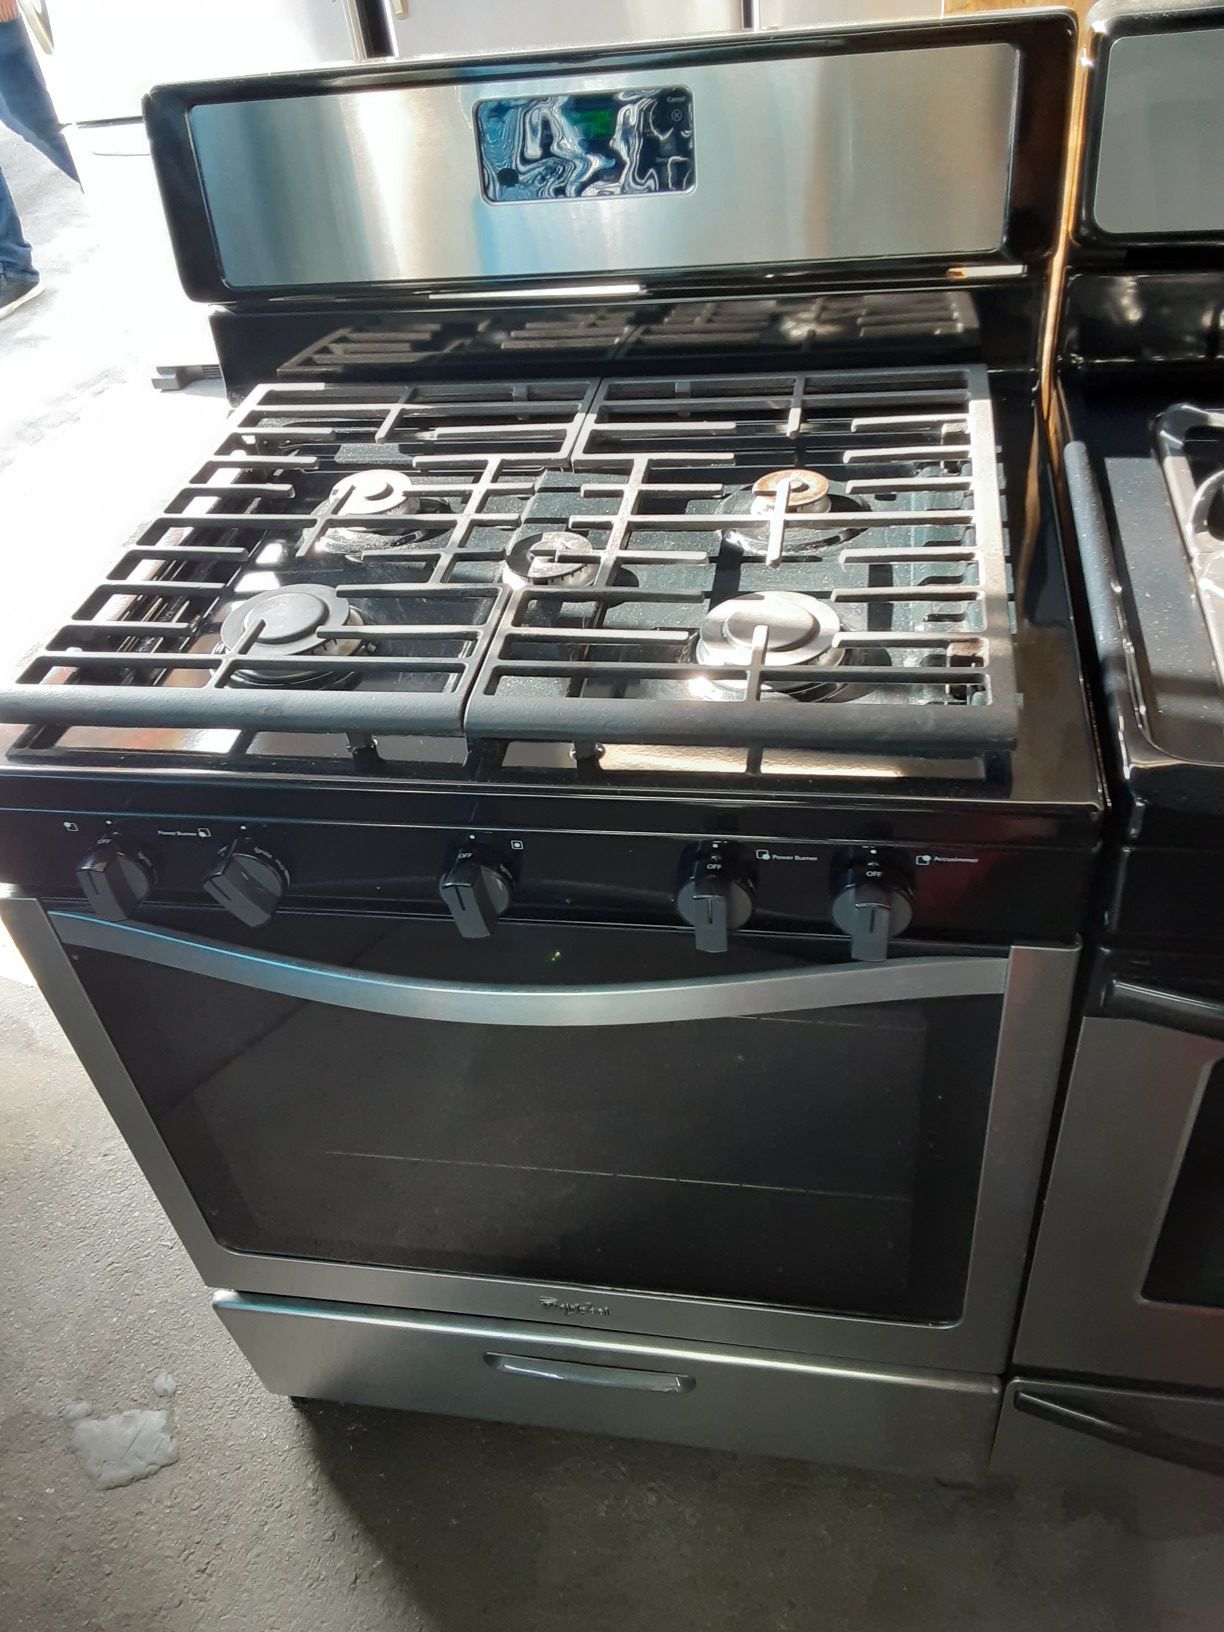 $450 Whirlpool stainless 5-burner gas range includes delivery in the San Fernando Valley a warranty and installation